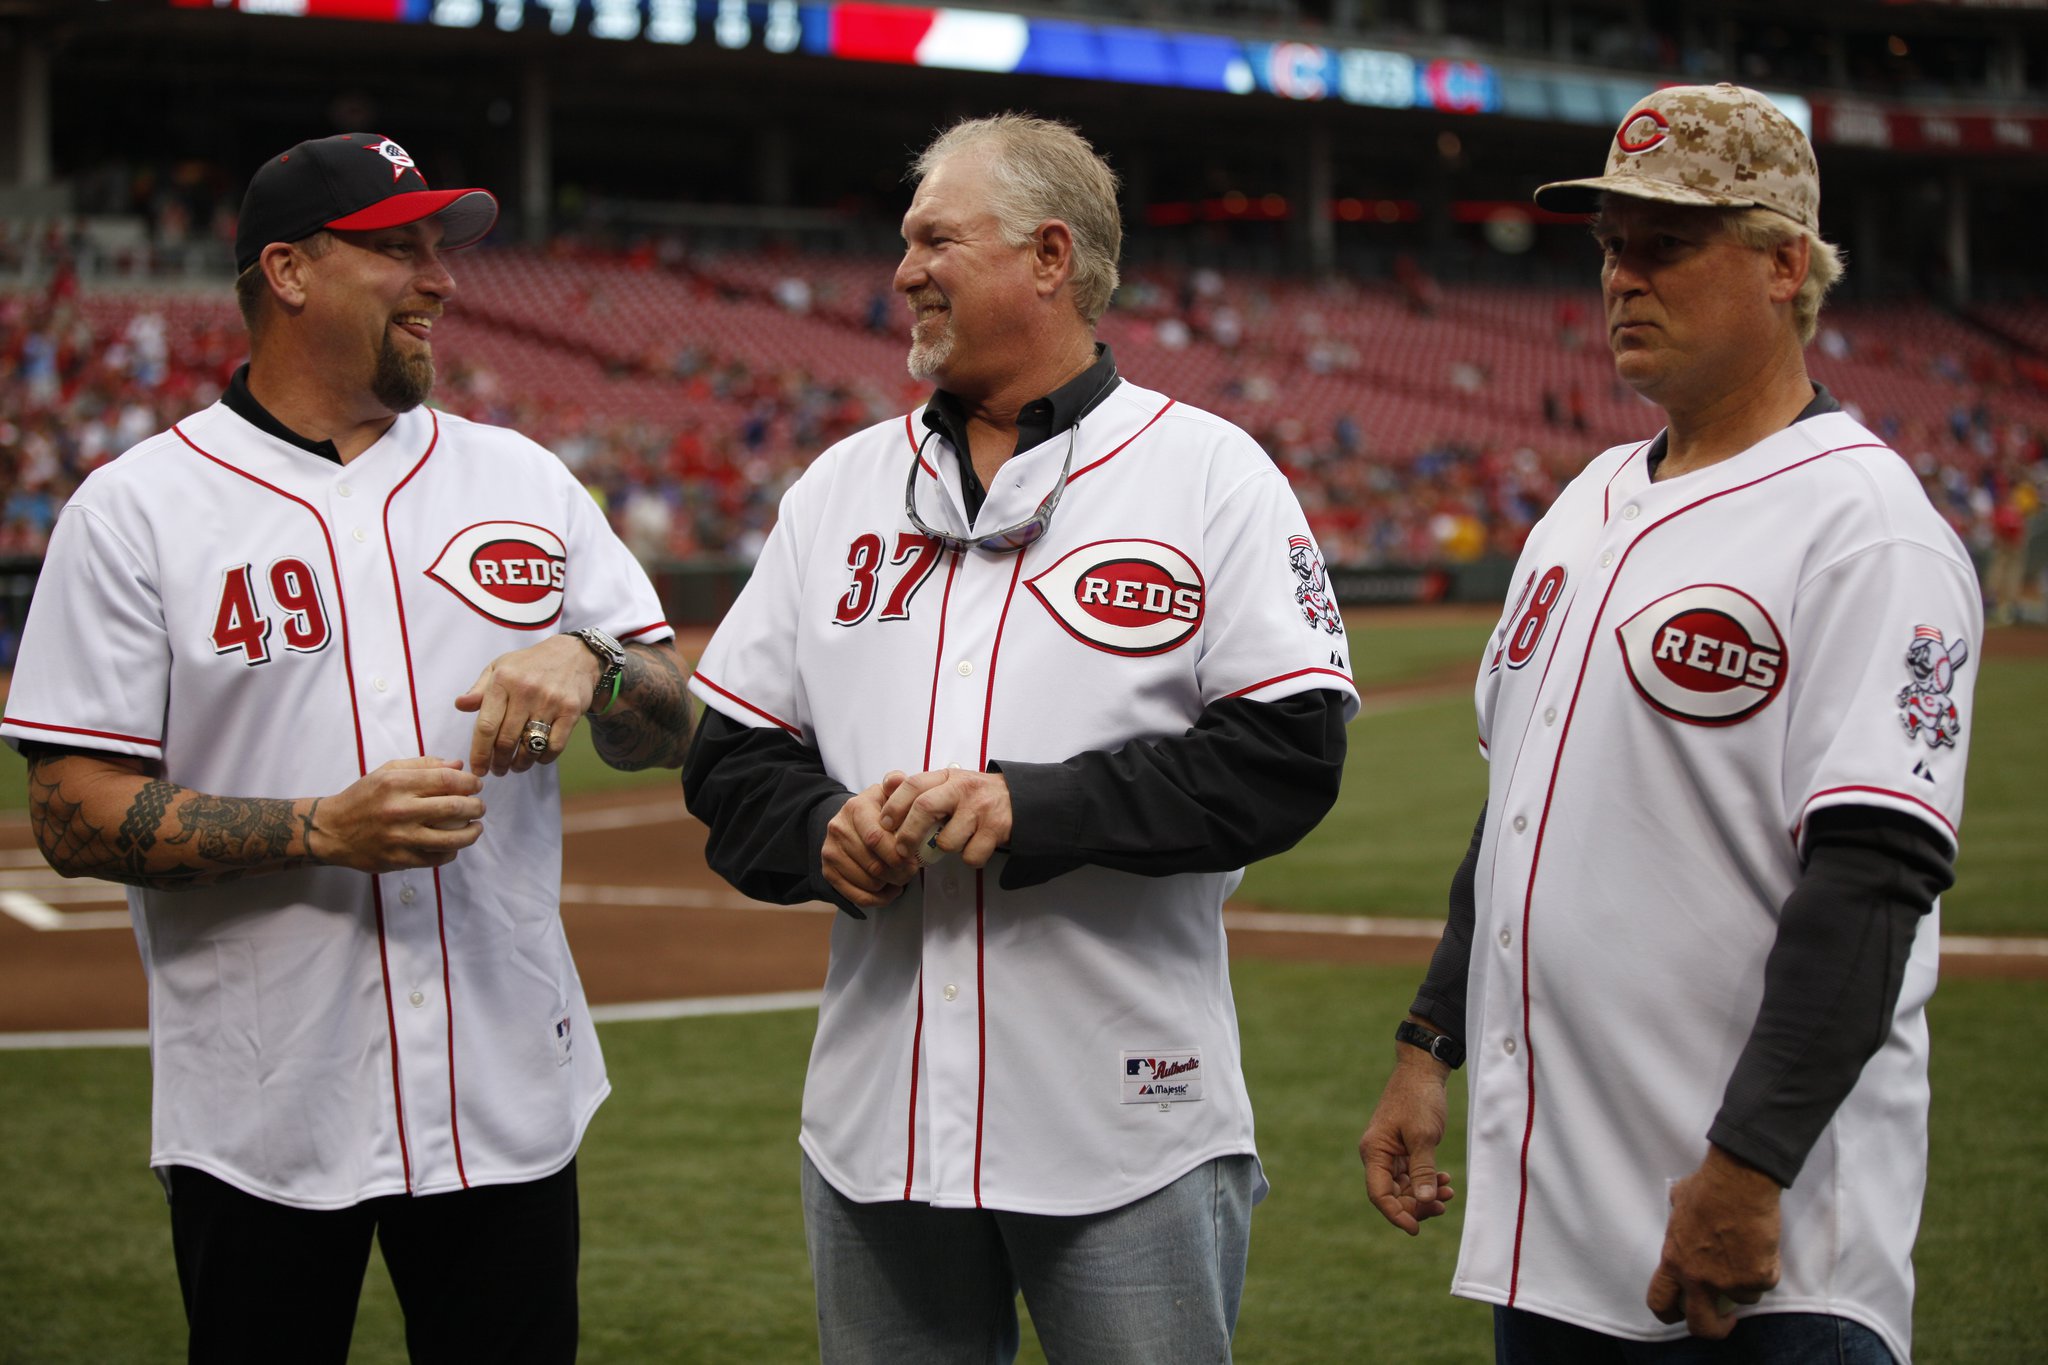 No Redsfest this year? No problem: Area sports show features 5 Reds legends